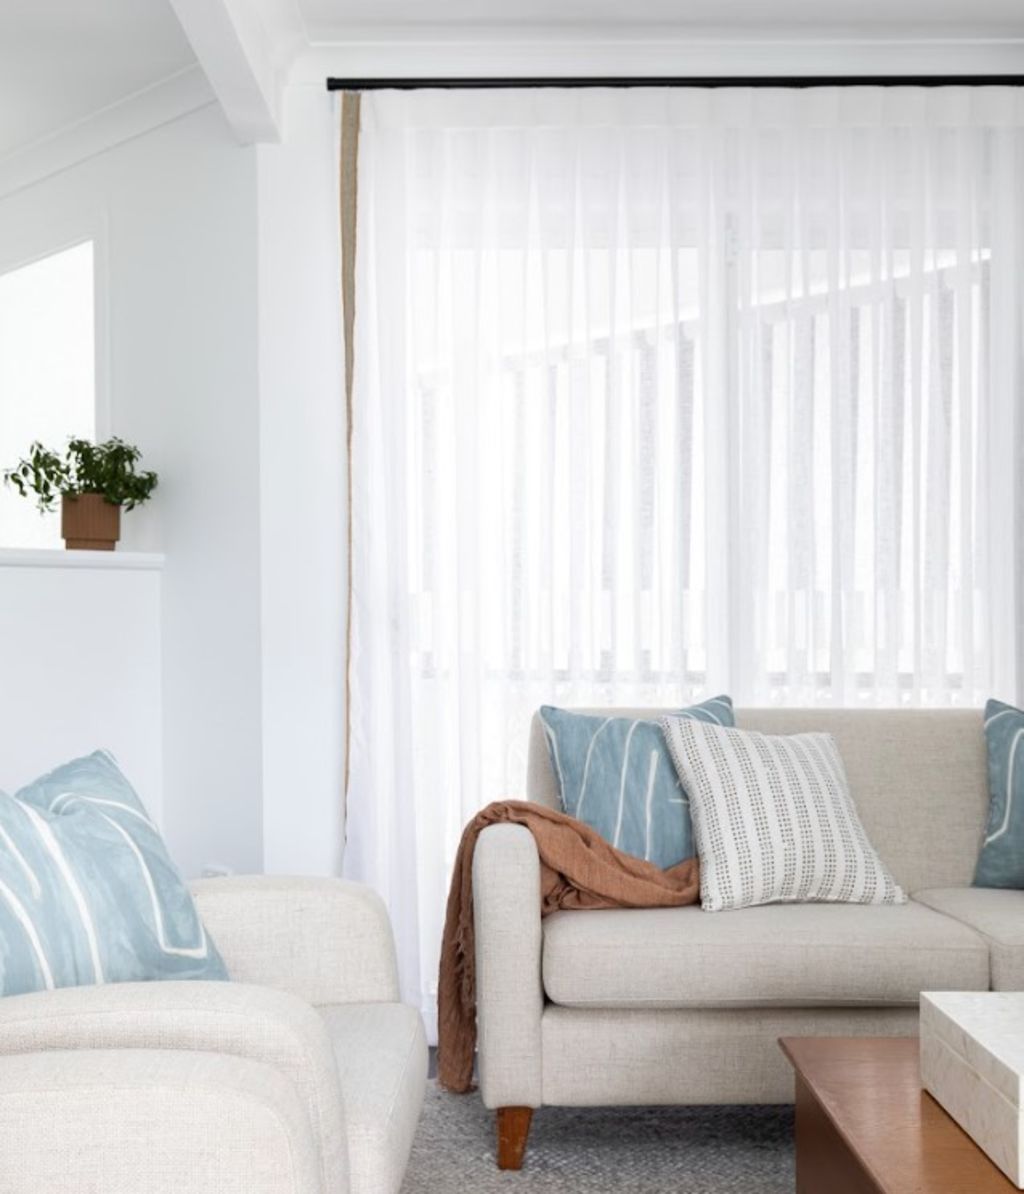 Sheer curtains in a design by Angie Rogers Interiors. Photo: Elouise van Riet-Gray